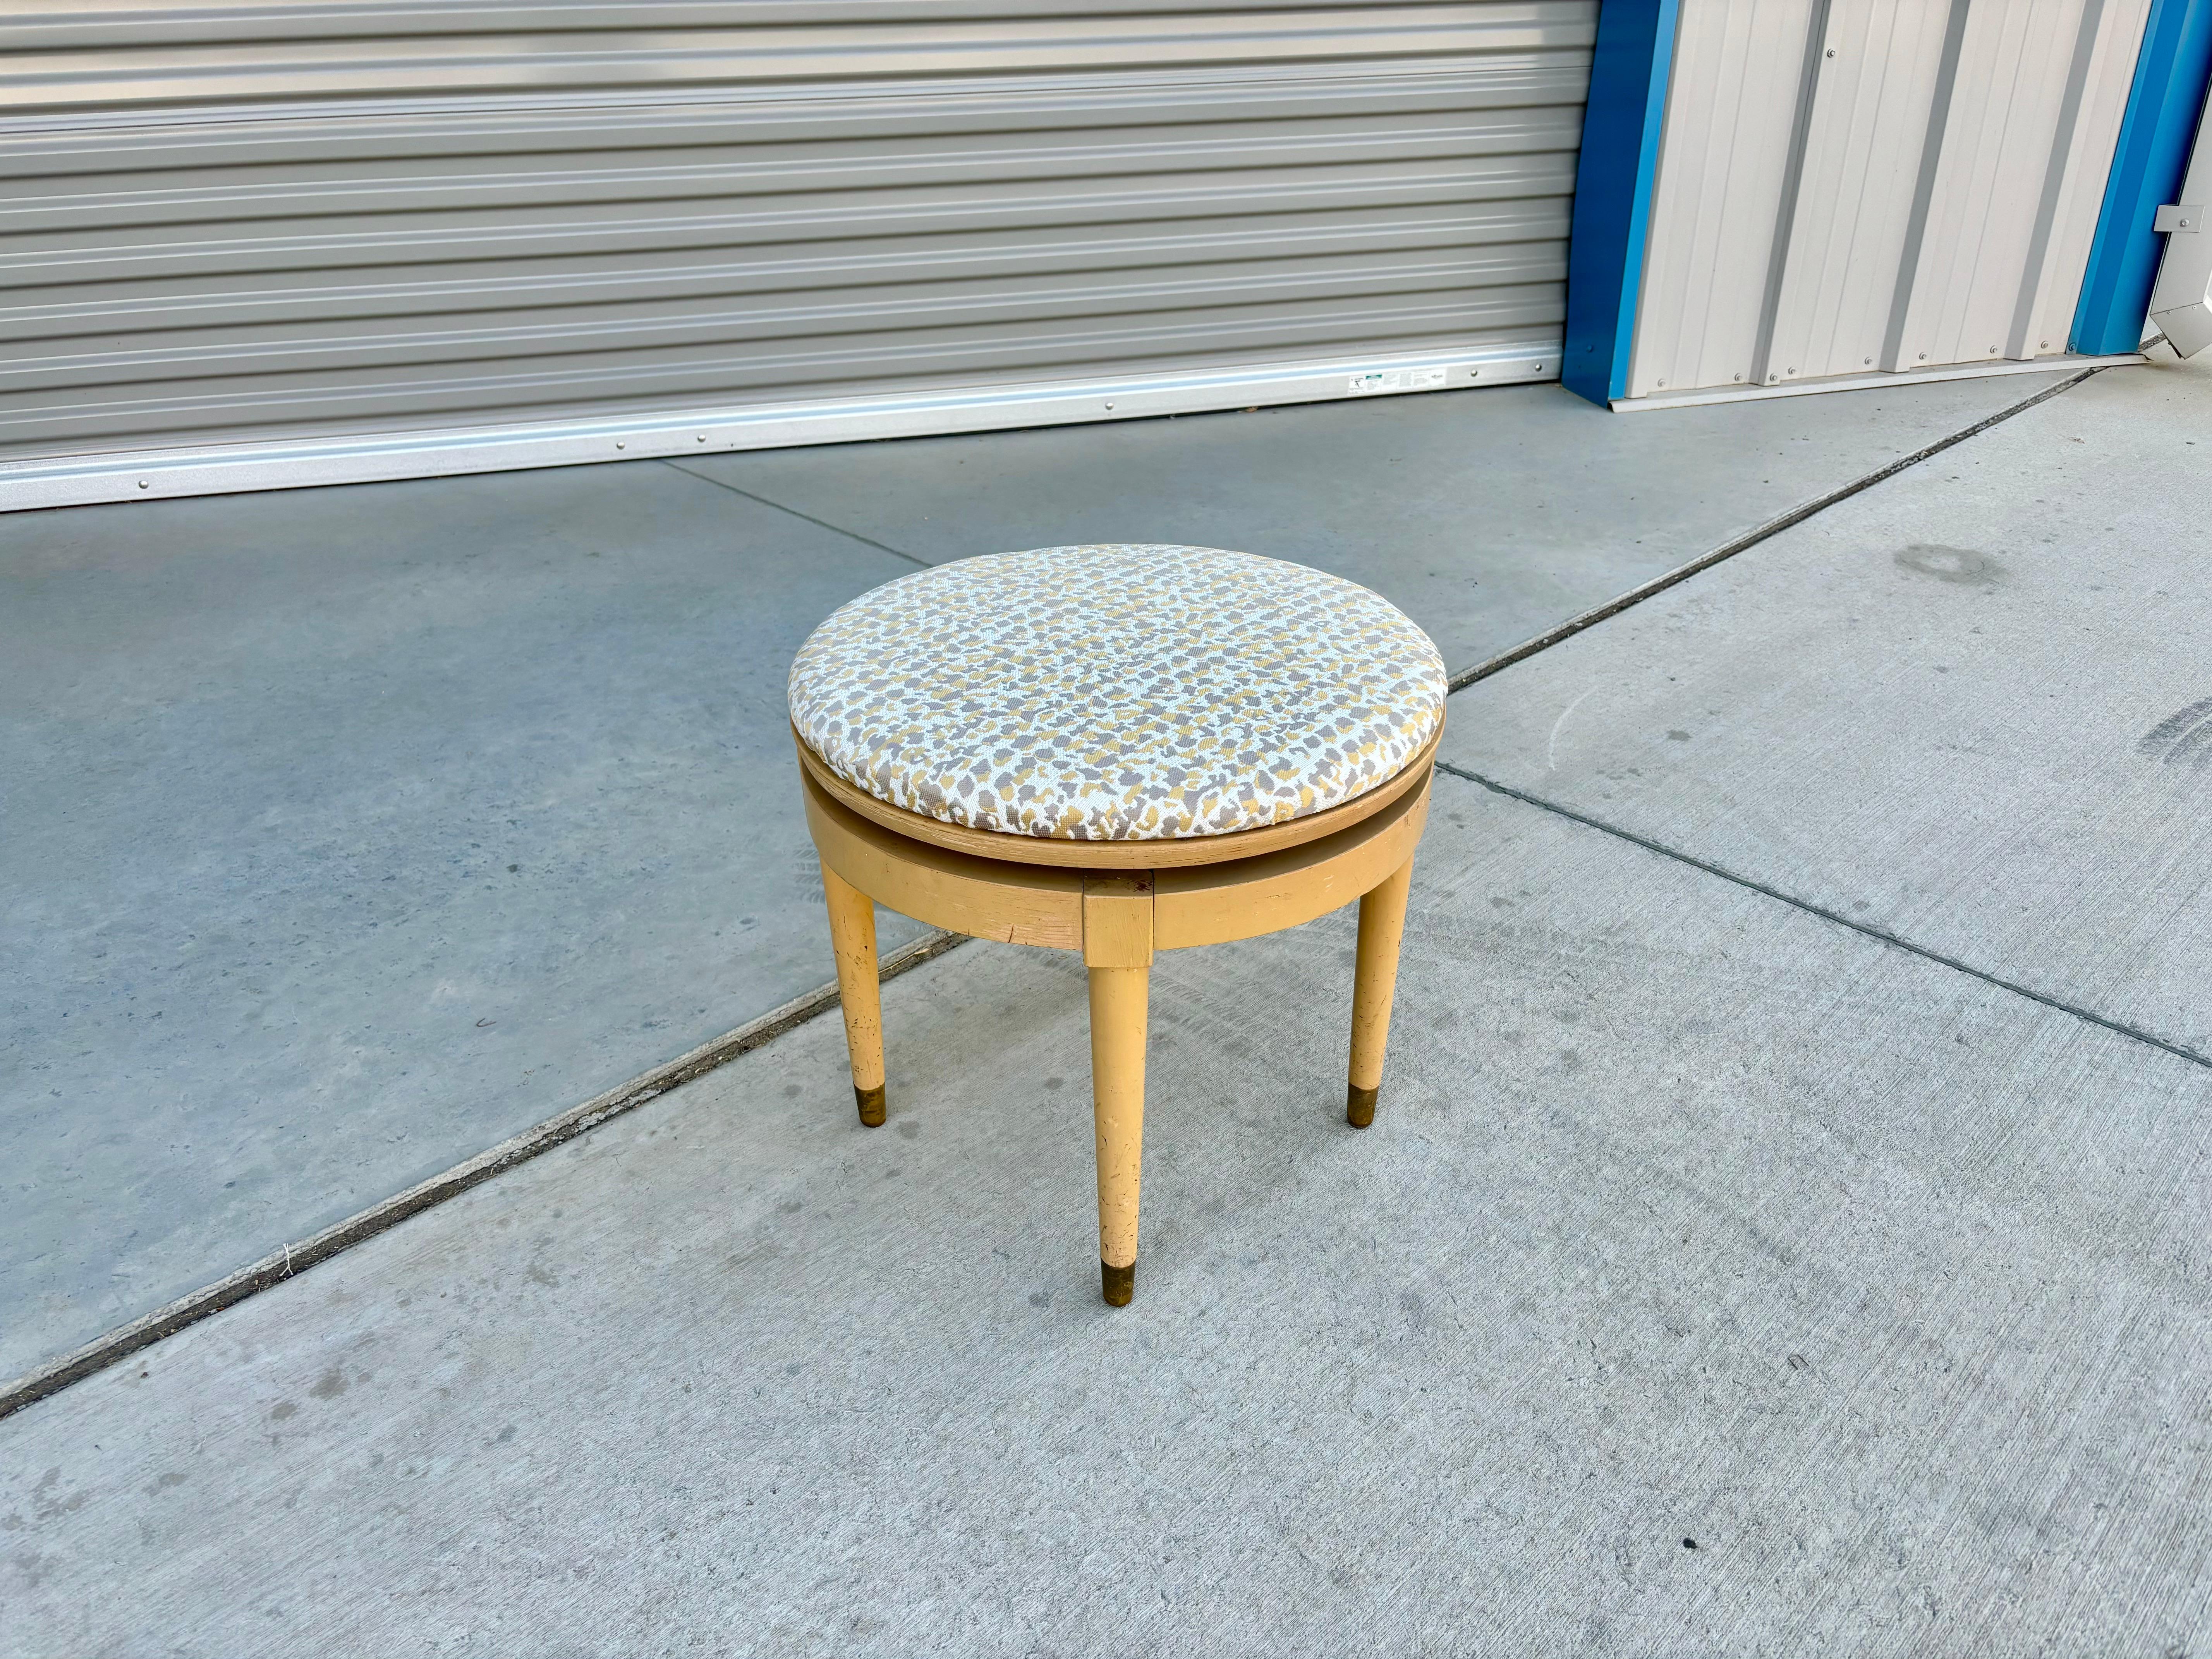 Mid-century modern swivel stool designed and manufactured in the United States circa 1970s. This stool is truly a work of art, with a wooden base allowing you to swivel 360 degrees. The stool has been newly upholstered, giving it an extra modern